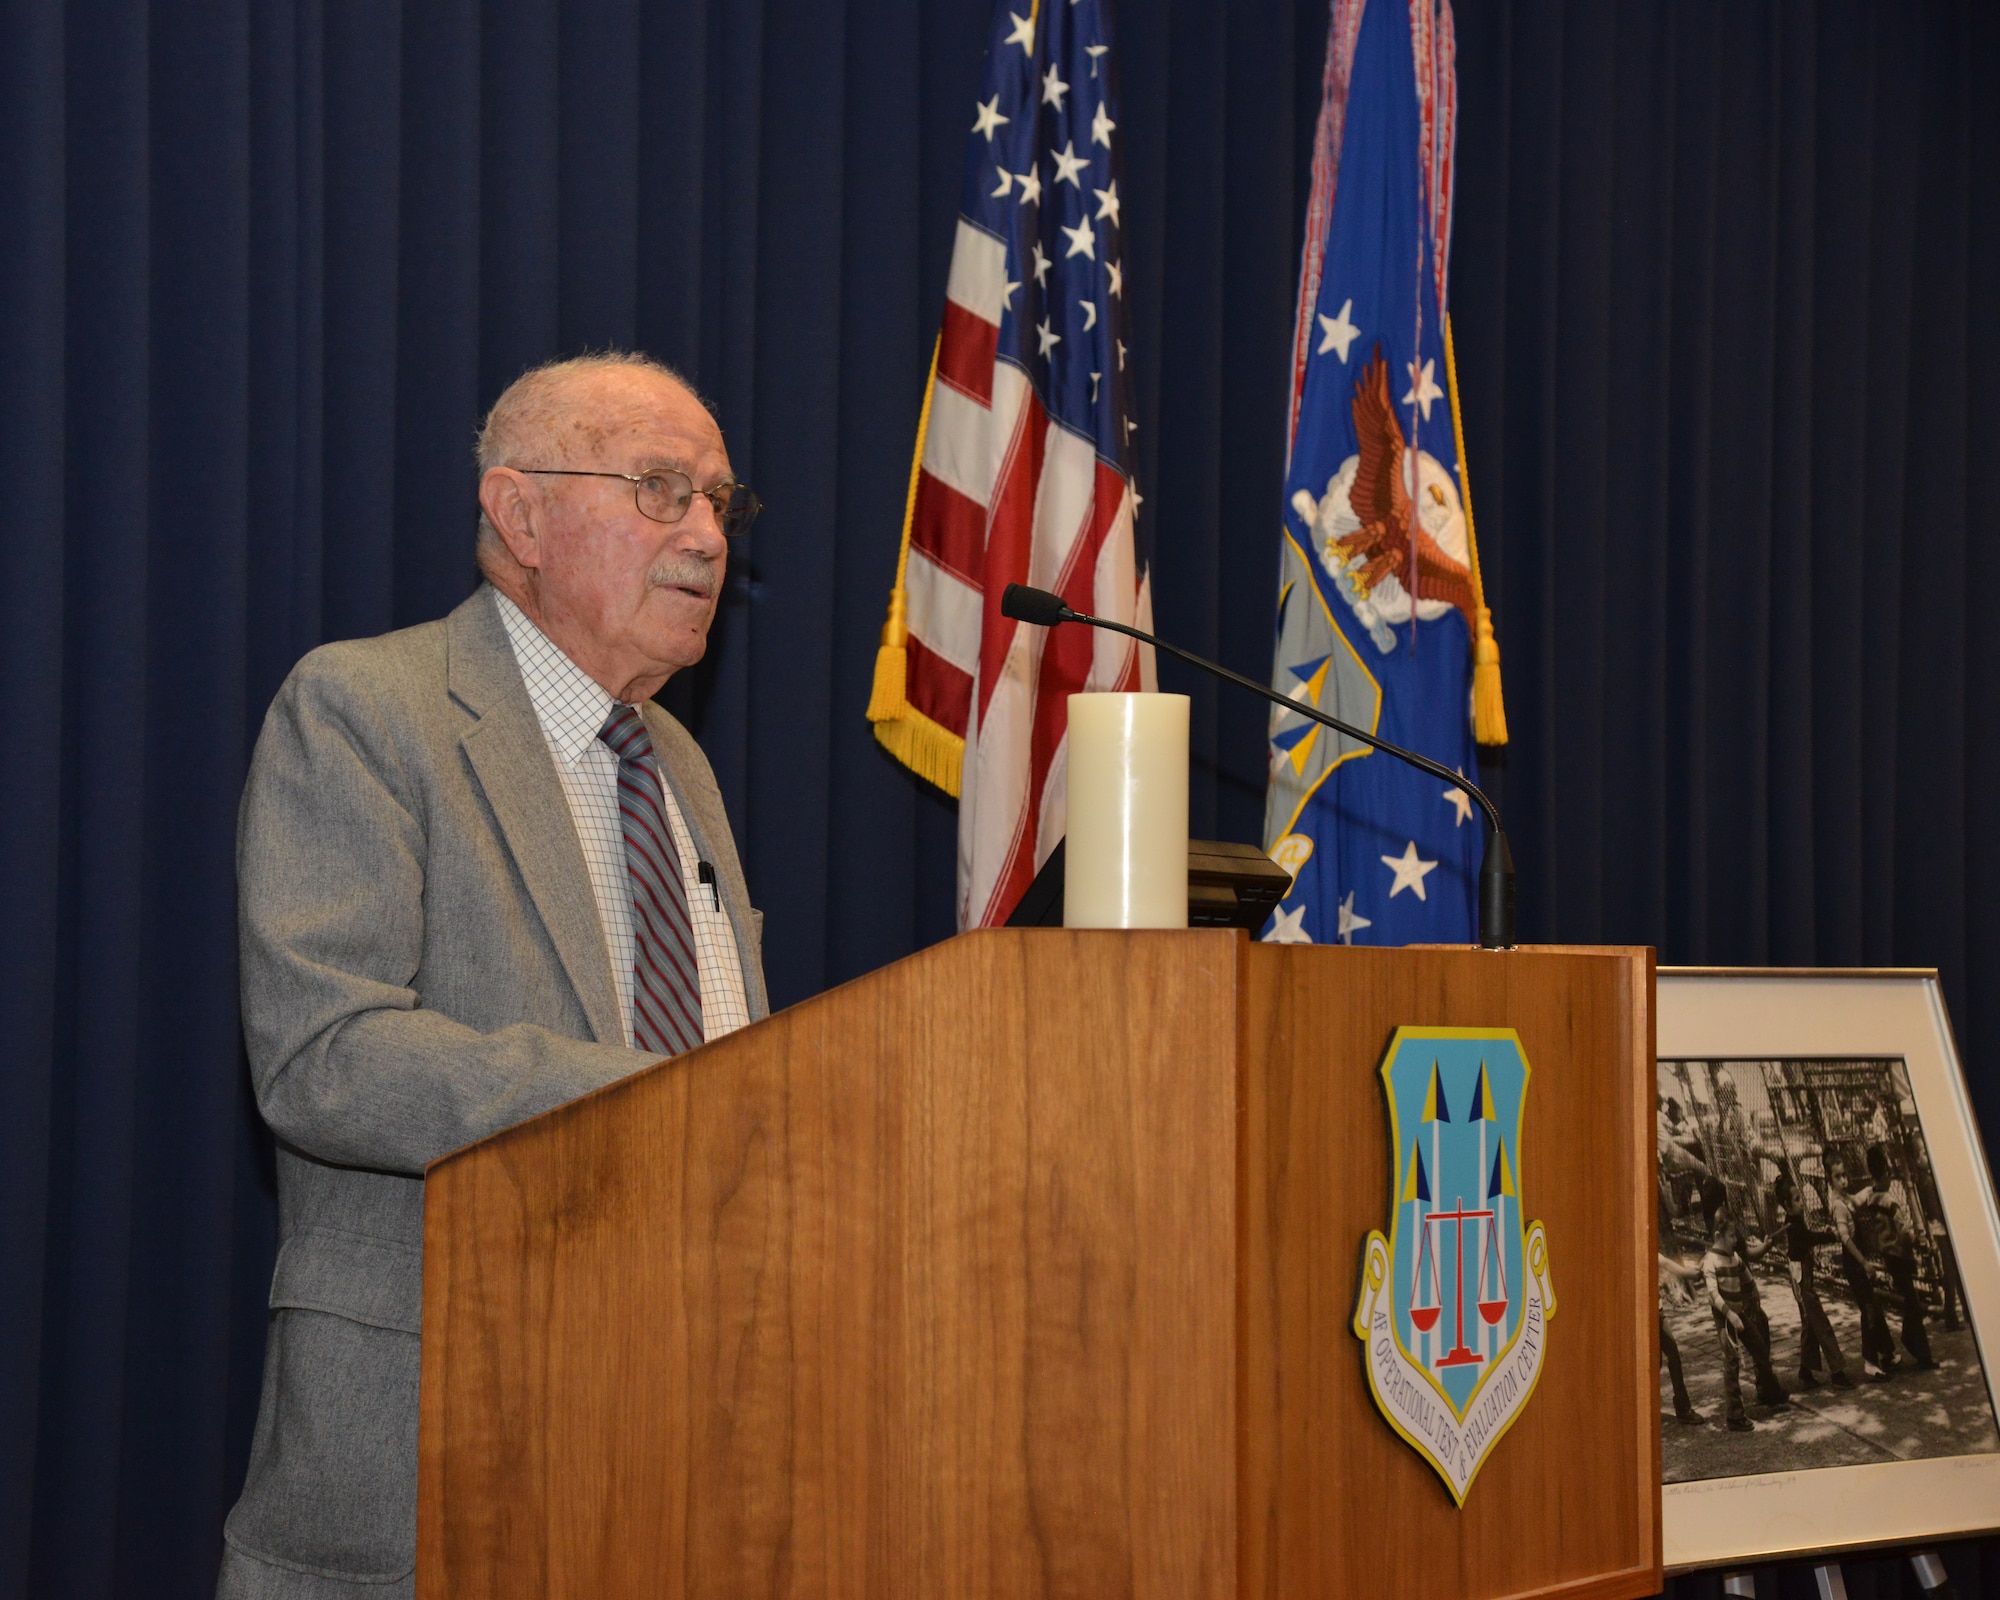 Roy Shaffer, a World War II veteran, spoke at the Holocaust Remembrance Ceremony May 4, sharing his experience of being posted at Flossenburg concentration camp as a 19-year-old soldier in 1945.